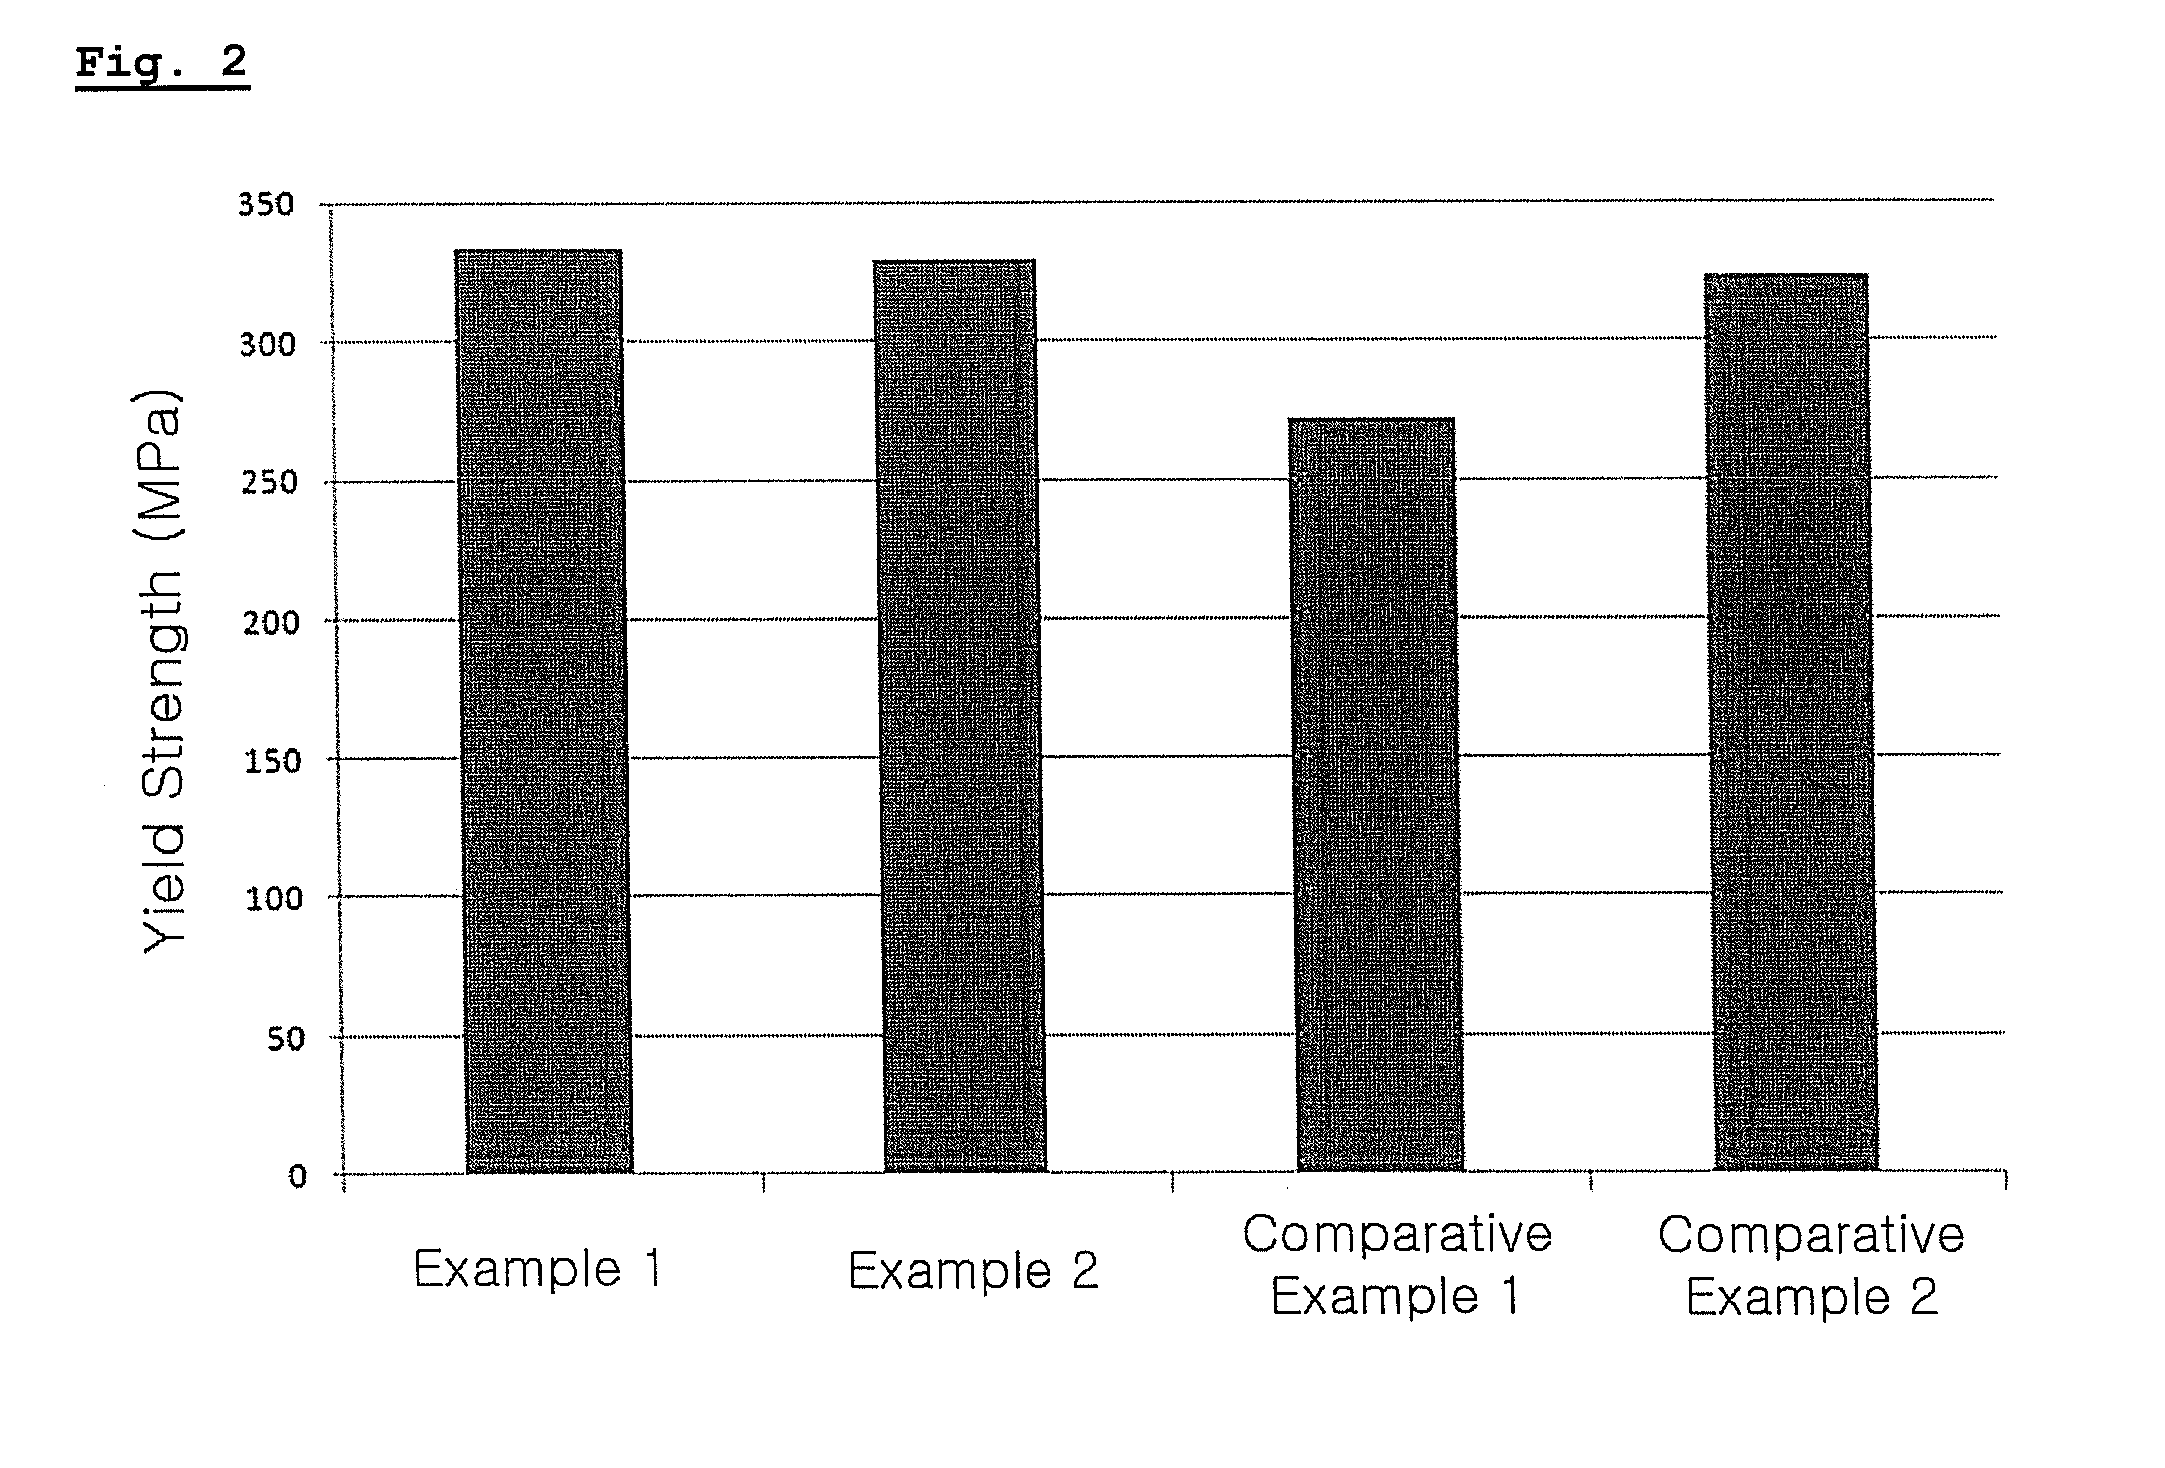 HIGH Cr FERRITIC/MARTENSITIC STEELS HAVING AN IMPROVED CREEP RESISTANCE FOR IN-CORE COMPONENT MATERIALS IN NUCLEAR REACTOR, AND PREPARATION METHOD THEREOF